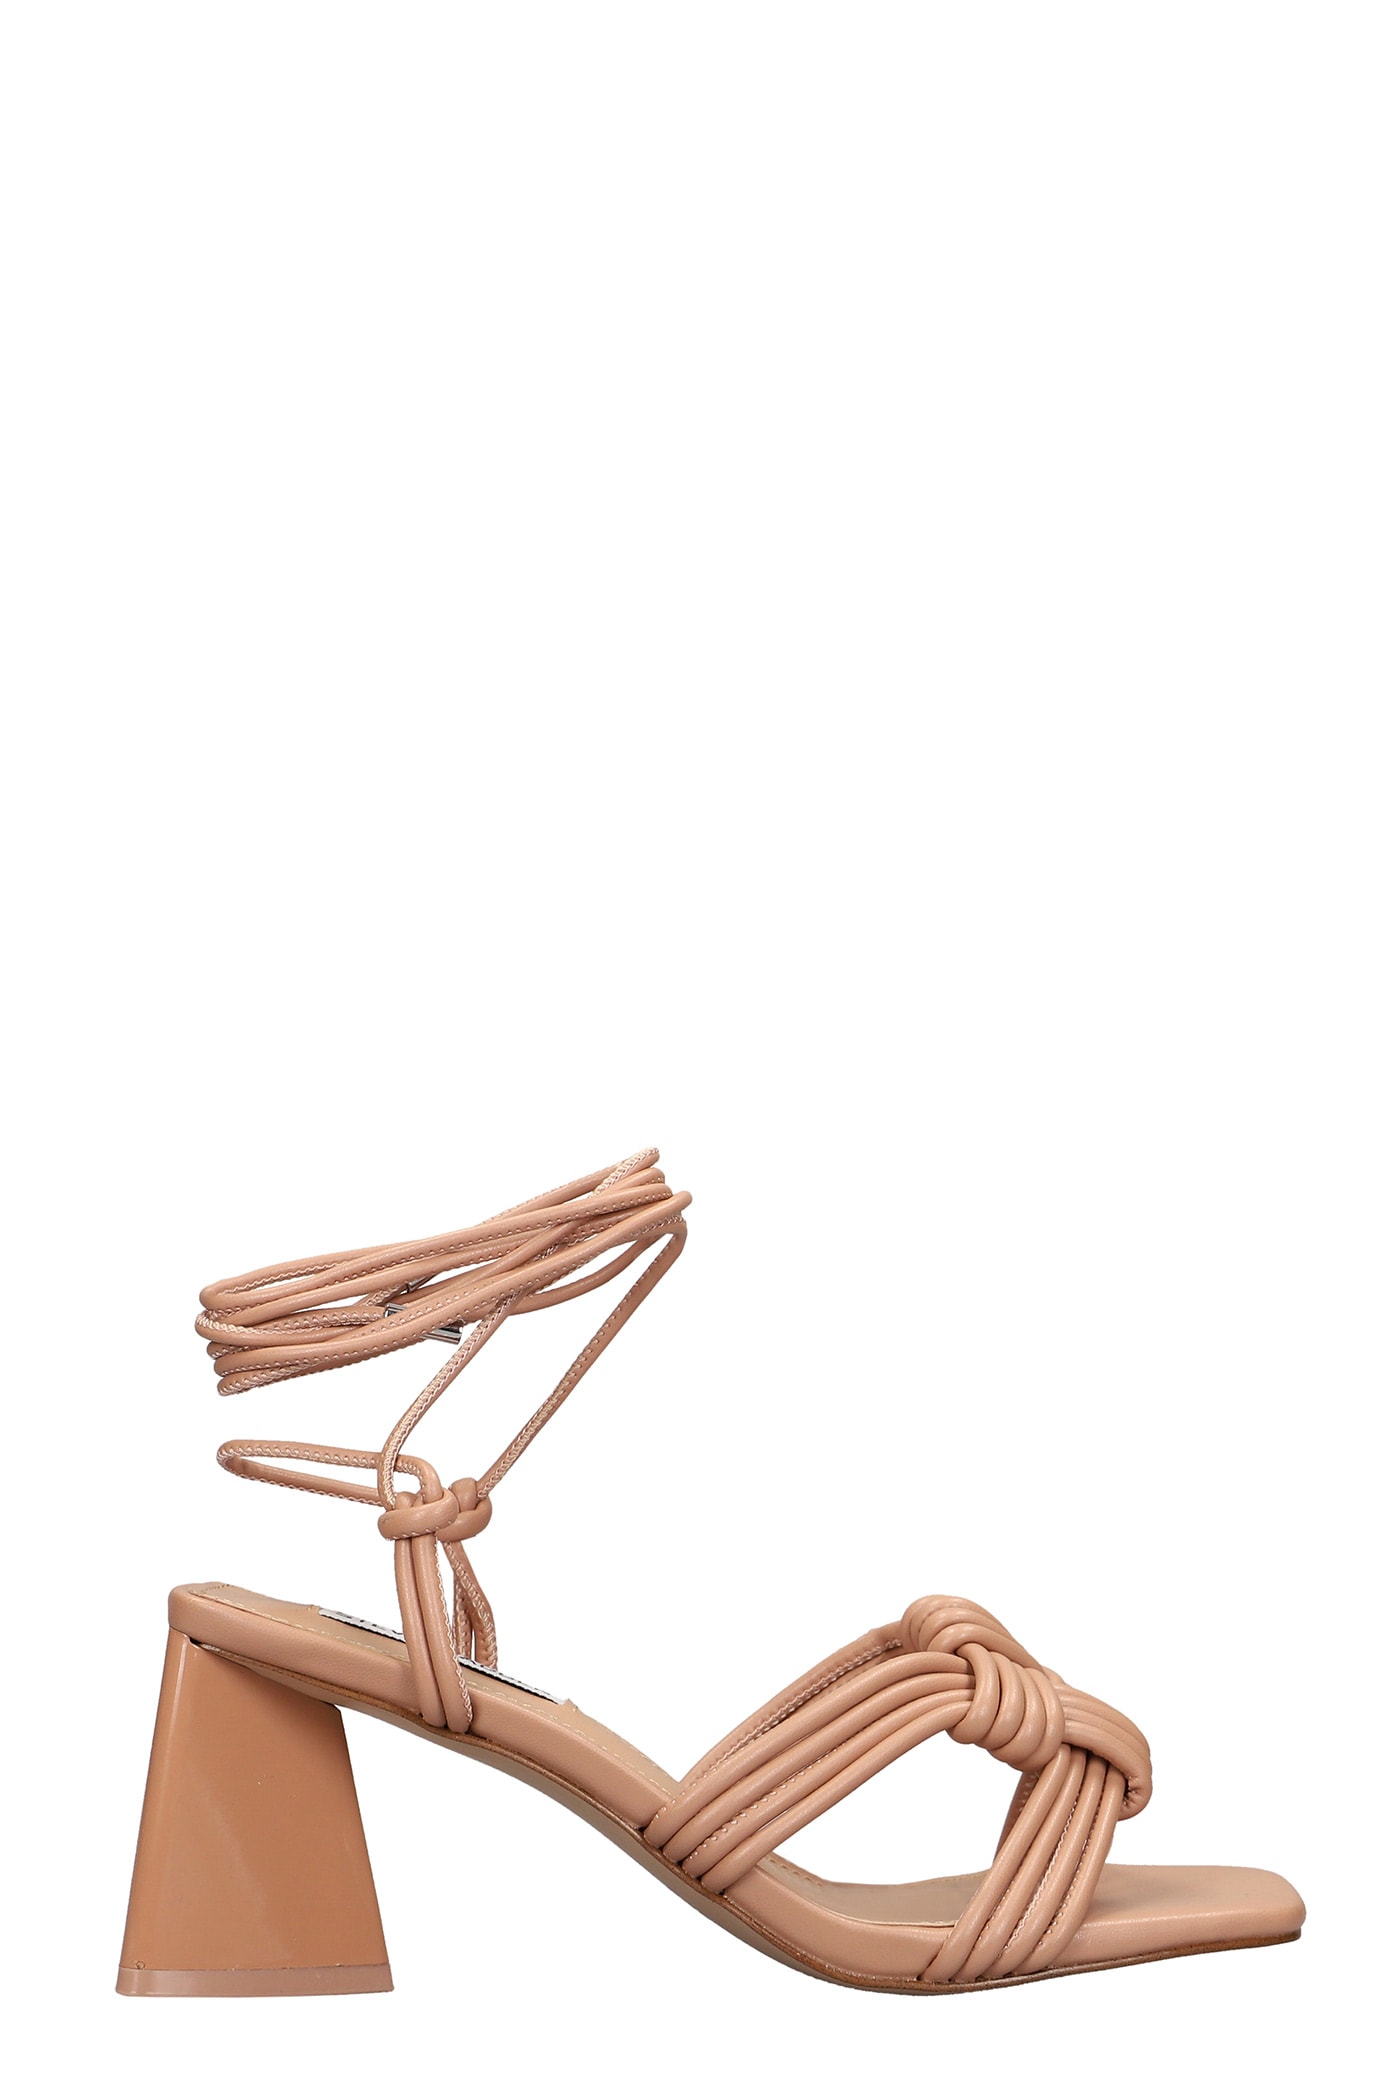 Steve Madden Miraya Sandals In Leather Color Leather